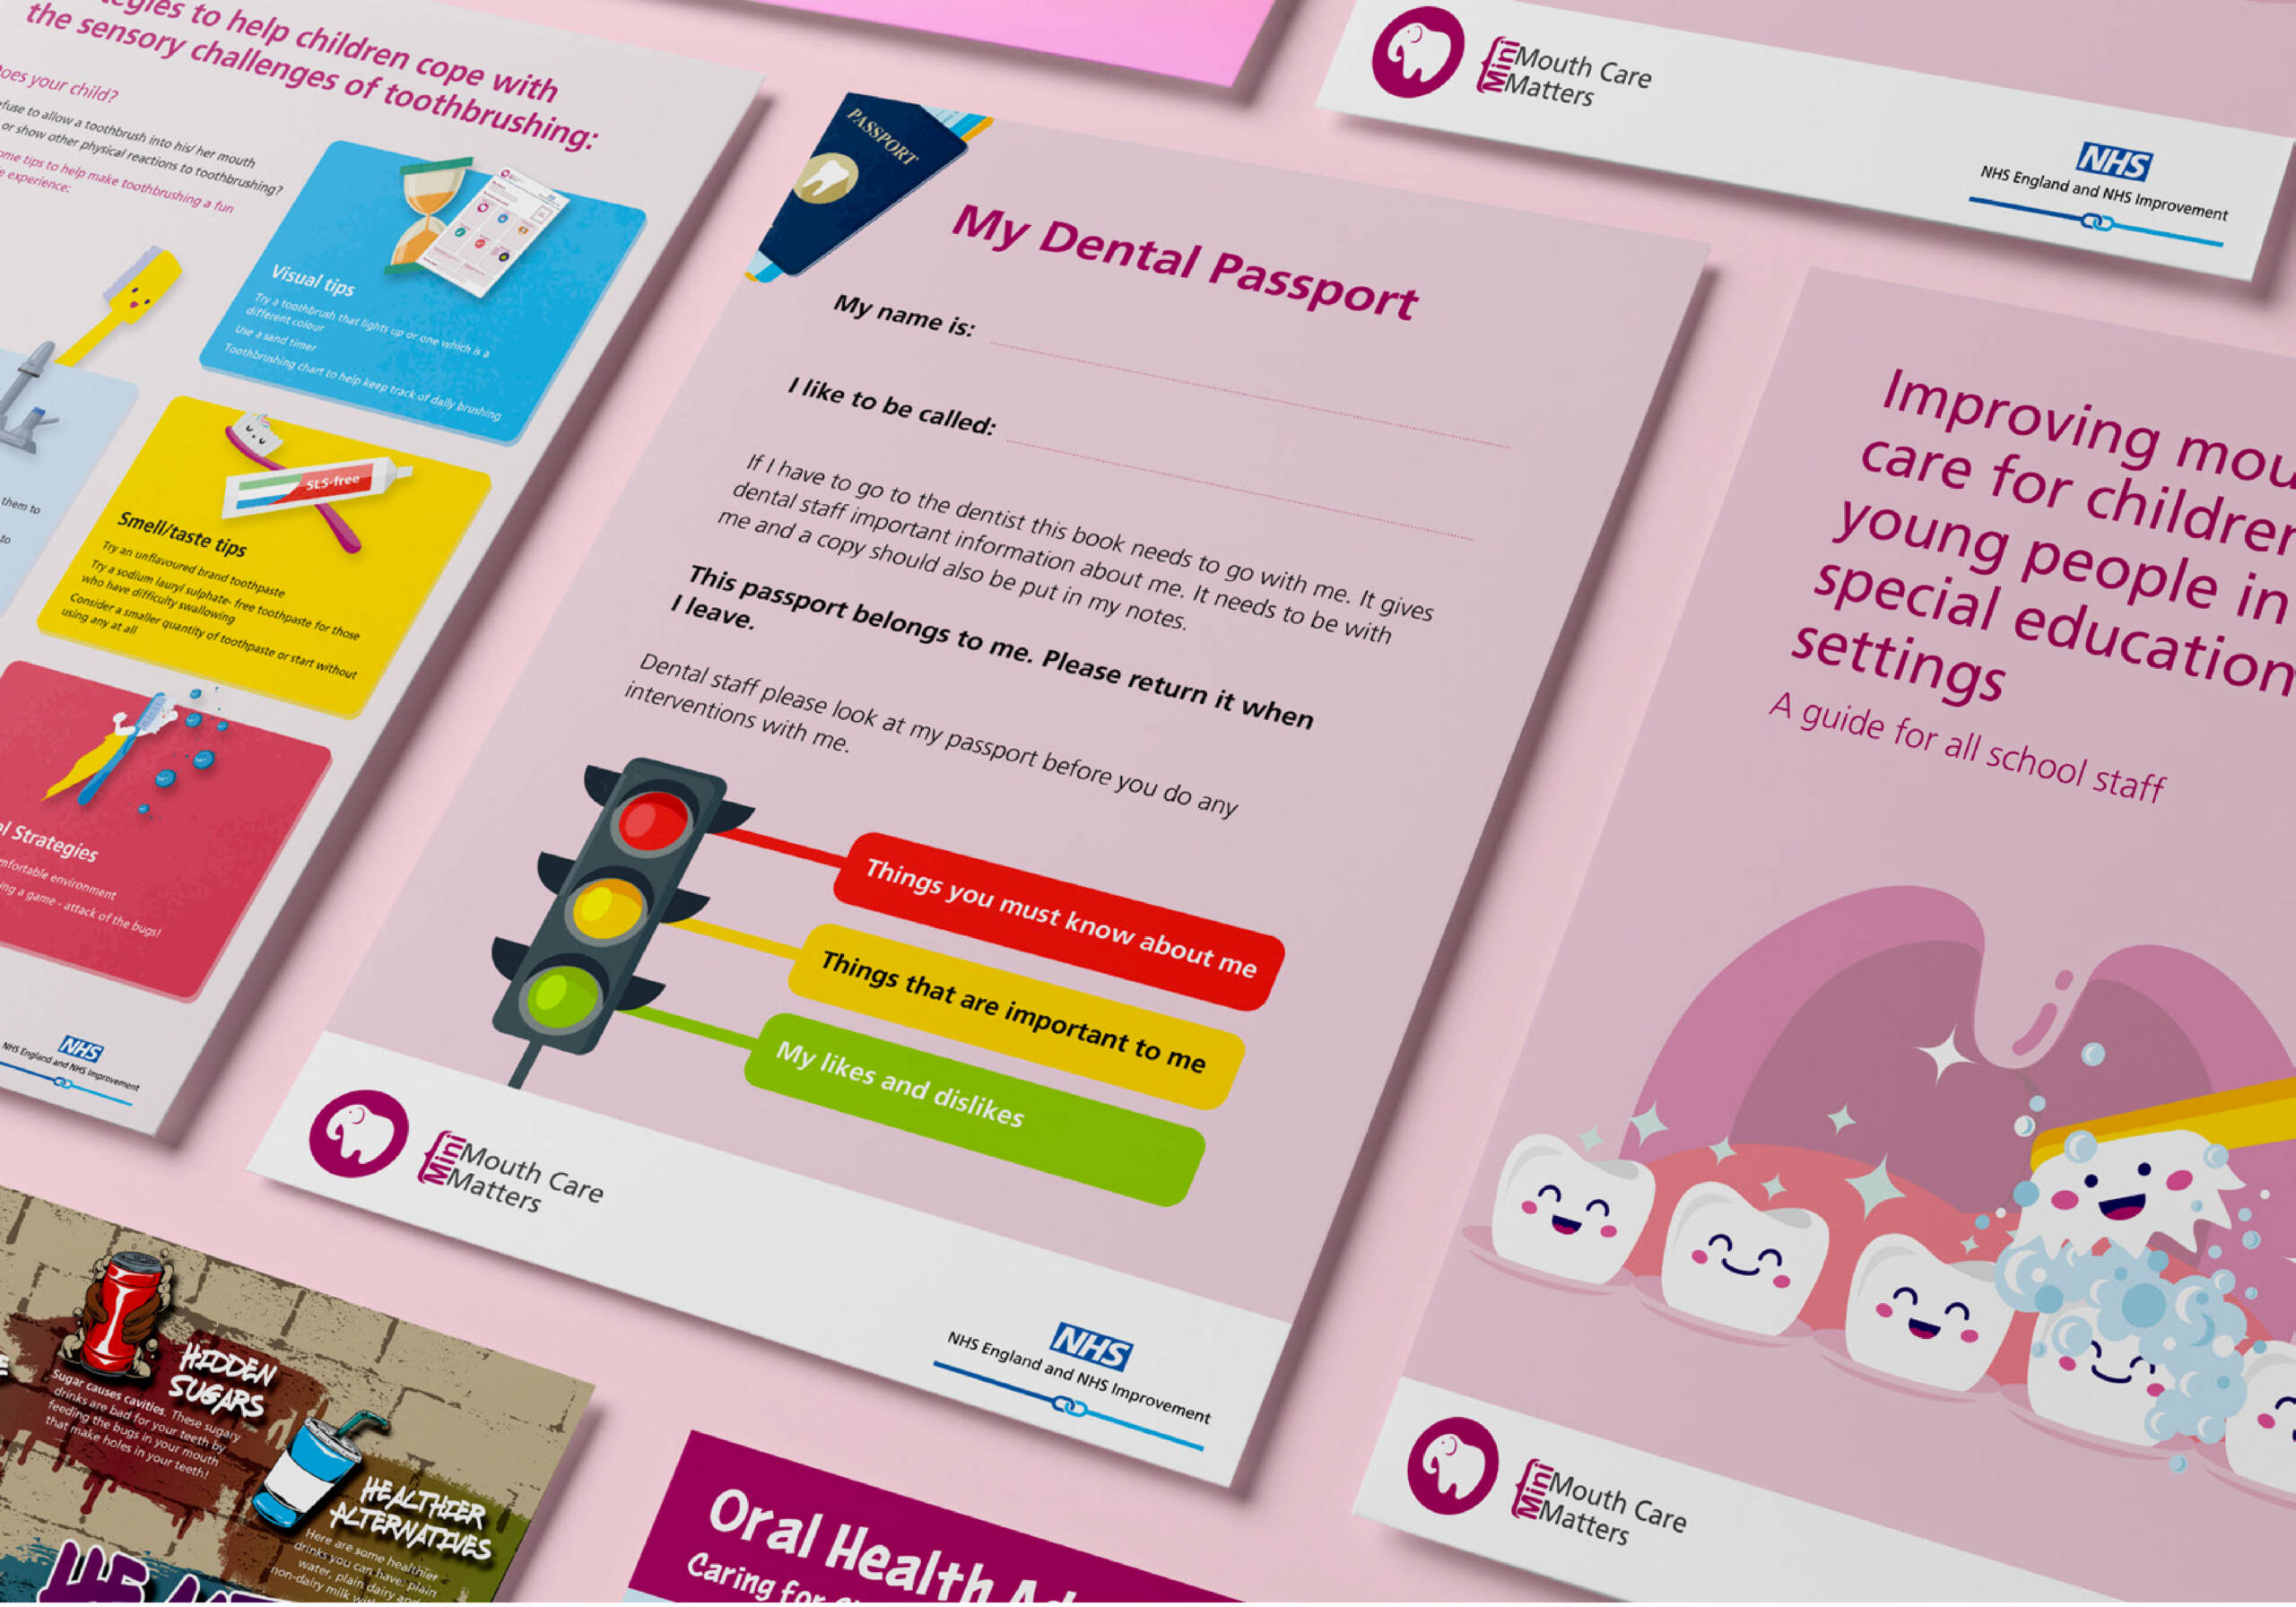 NHS England – Mini Mouth Care Matters